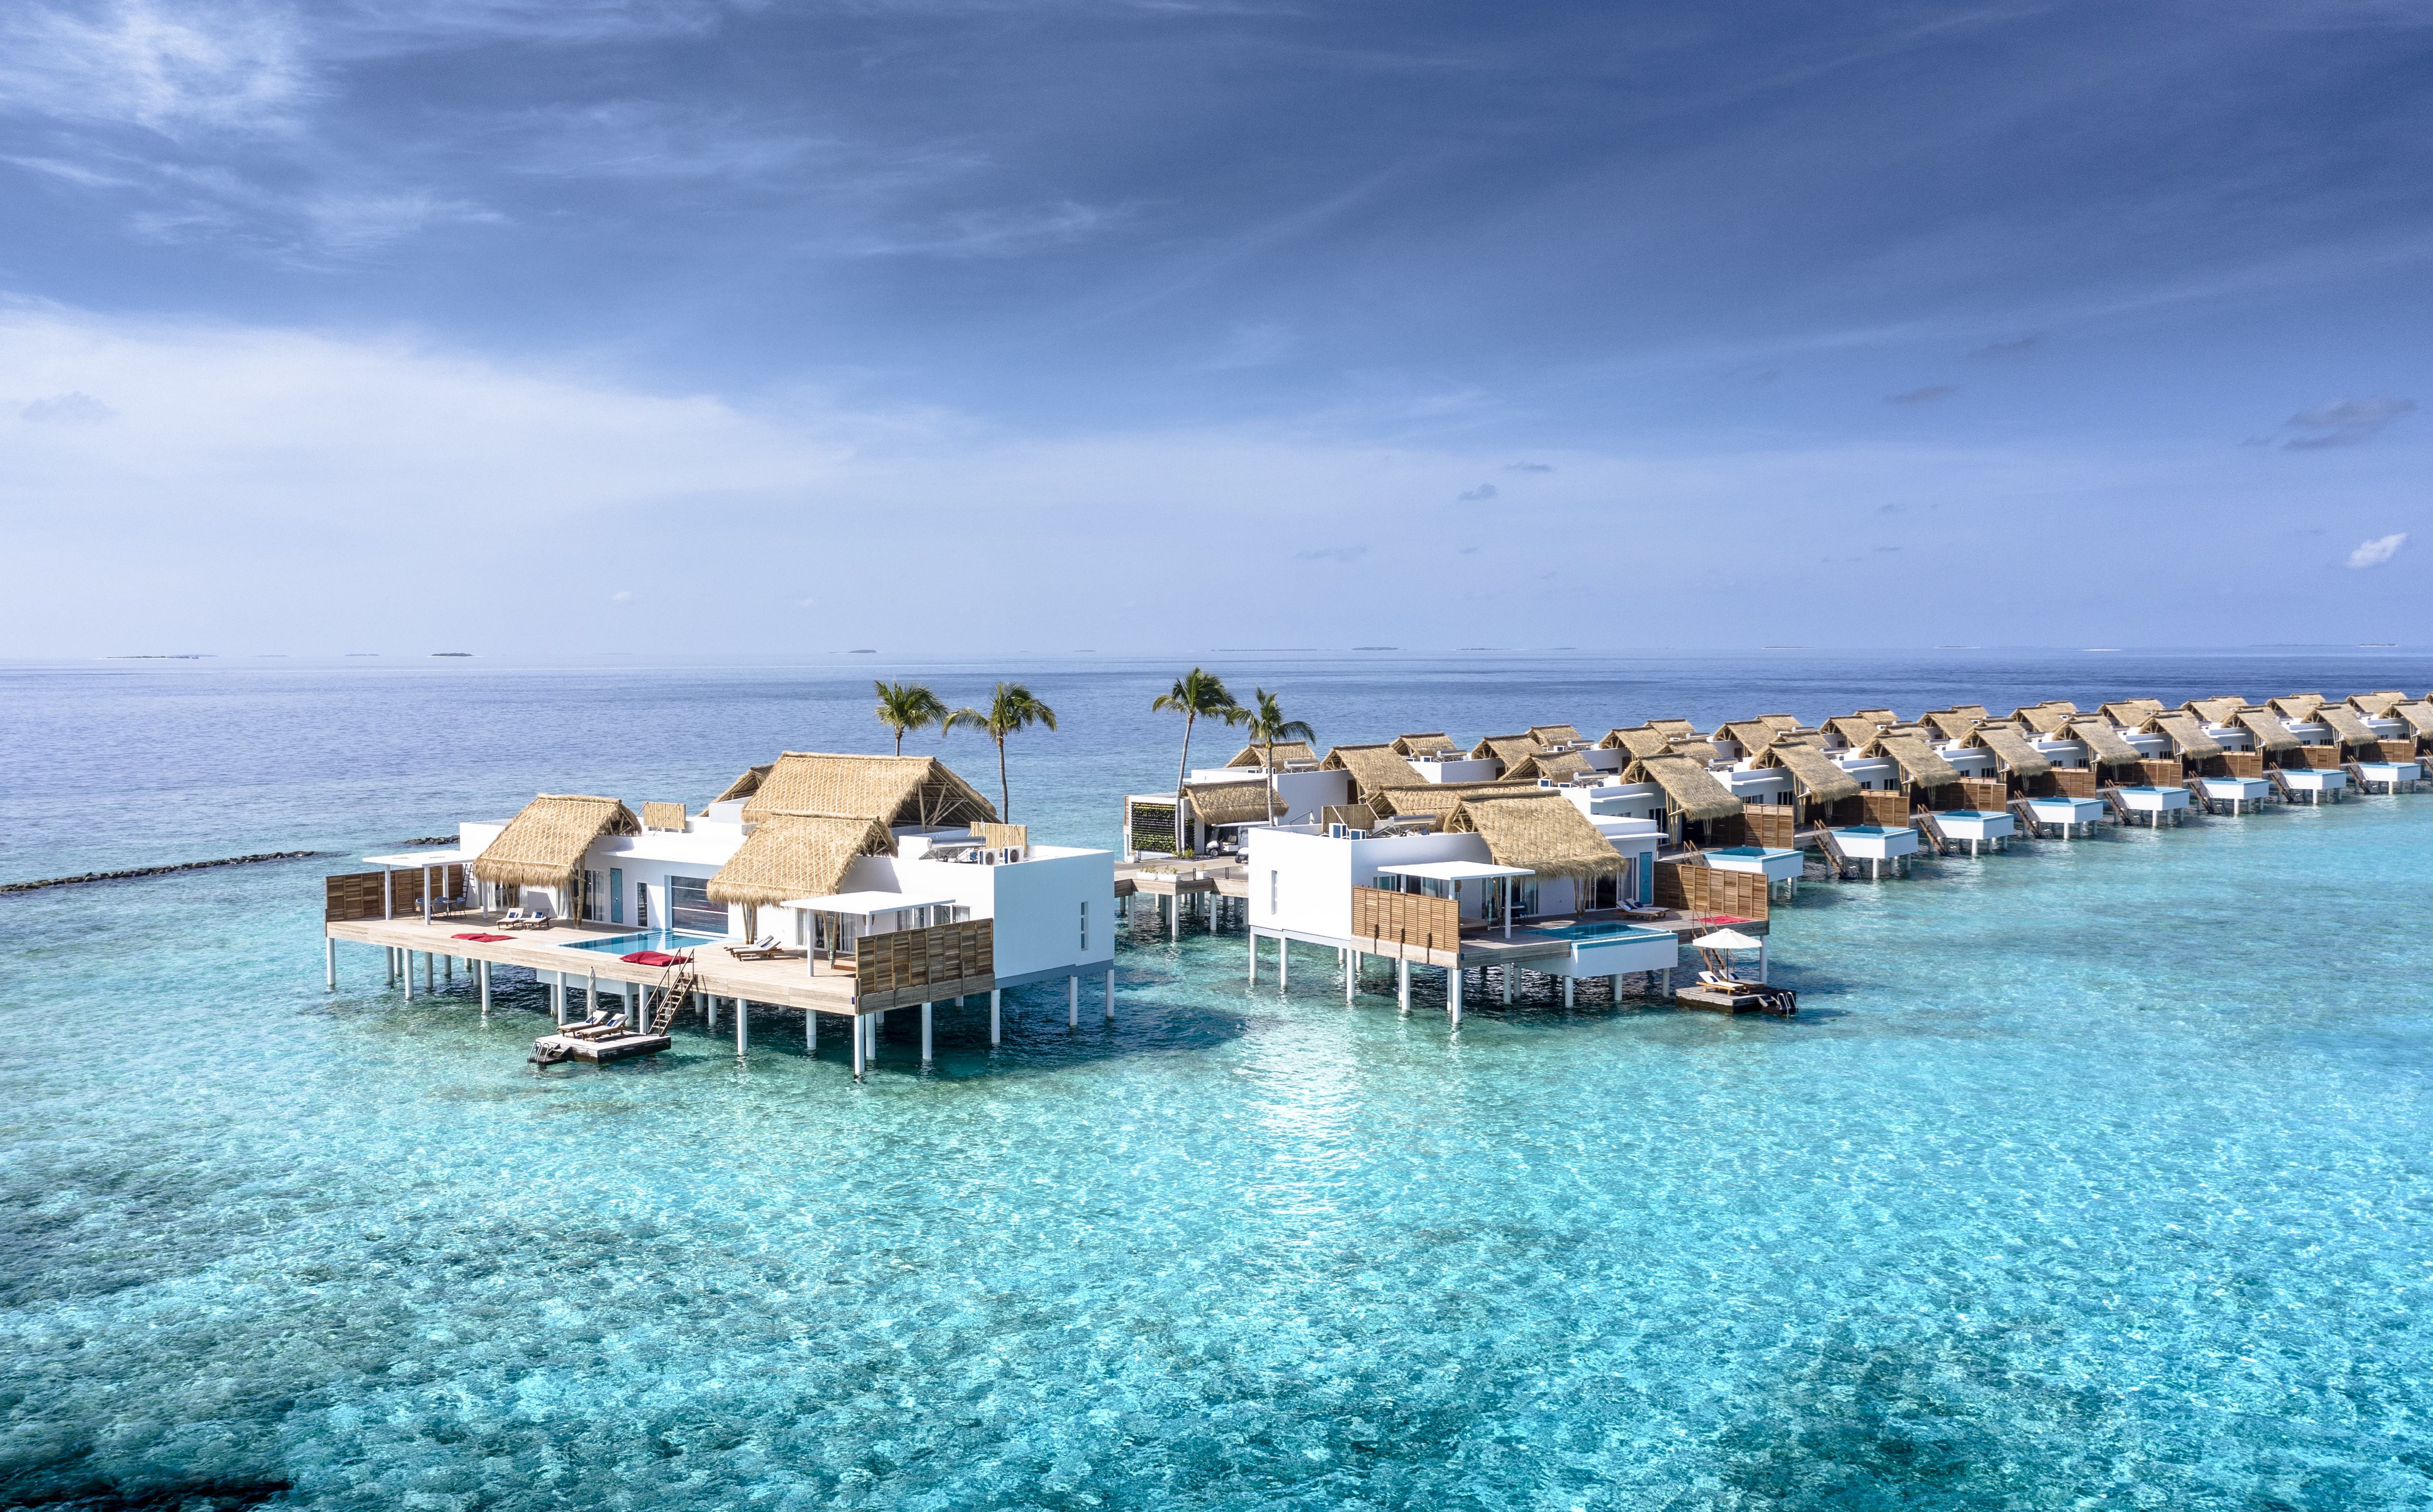 Coral Glass Return to Emerald Maldives  Resort Spa with 